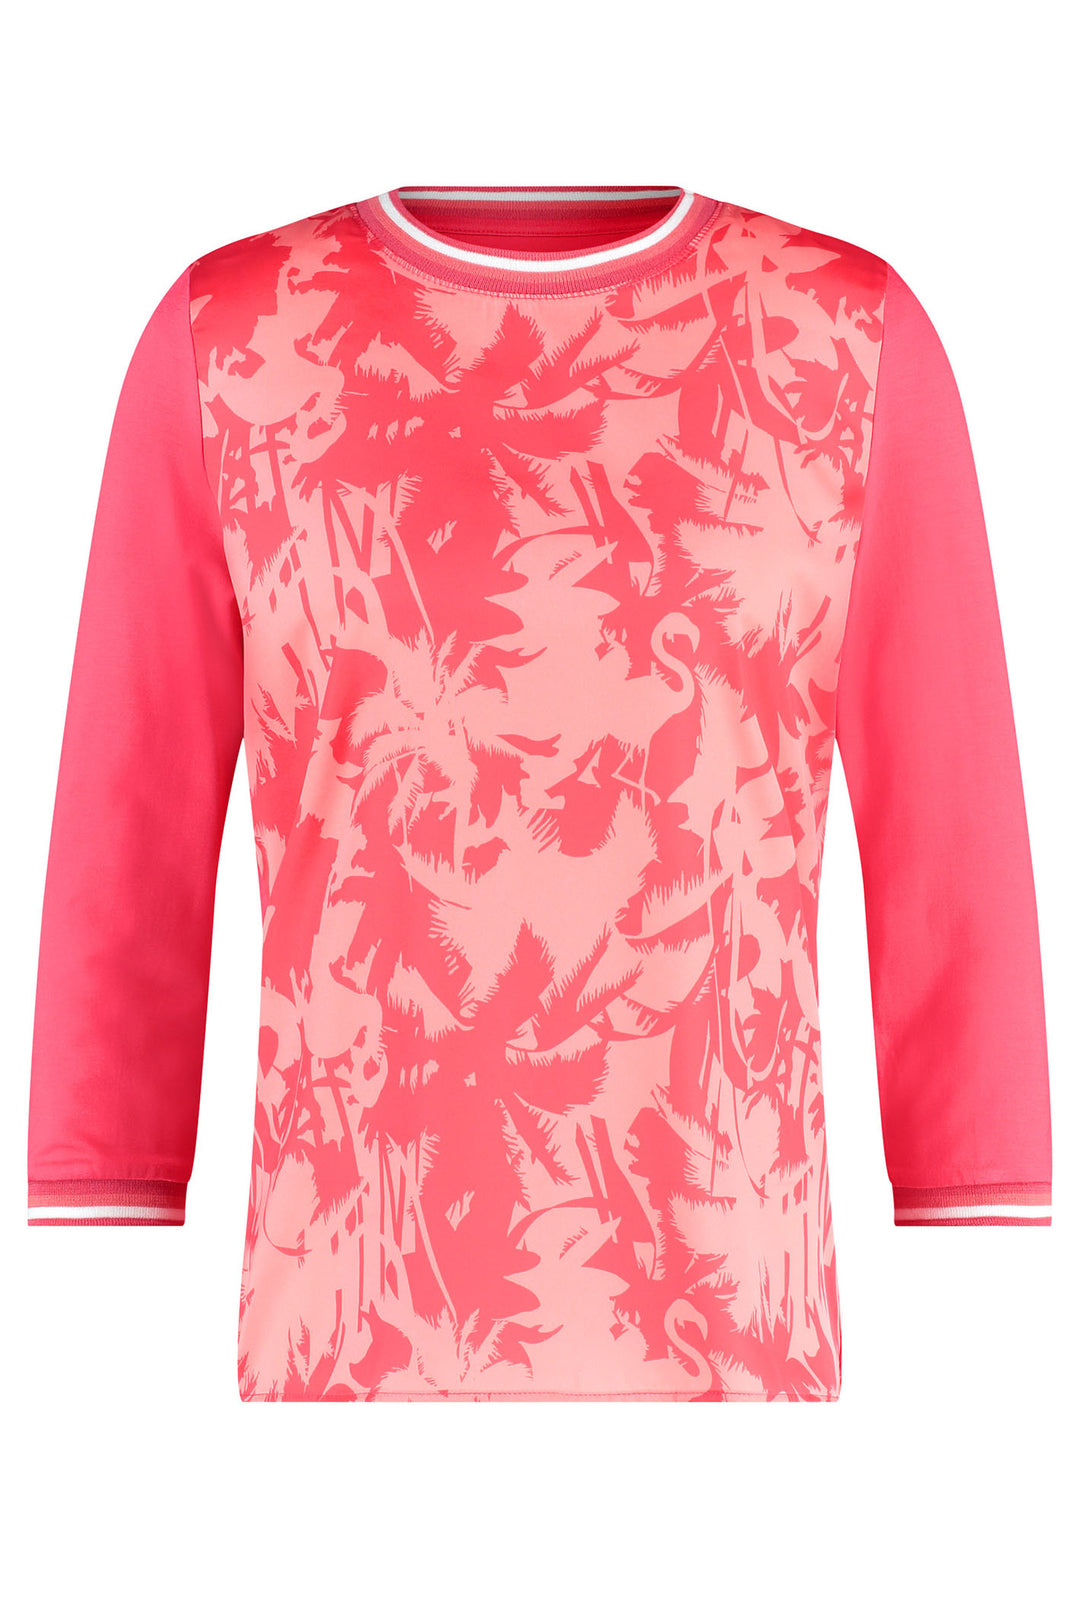 Gerry Weber 270054 6069 Coral Tropical Print Satin Front Top - Experience Boutique